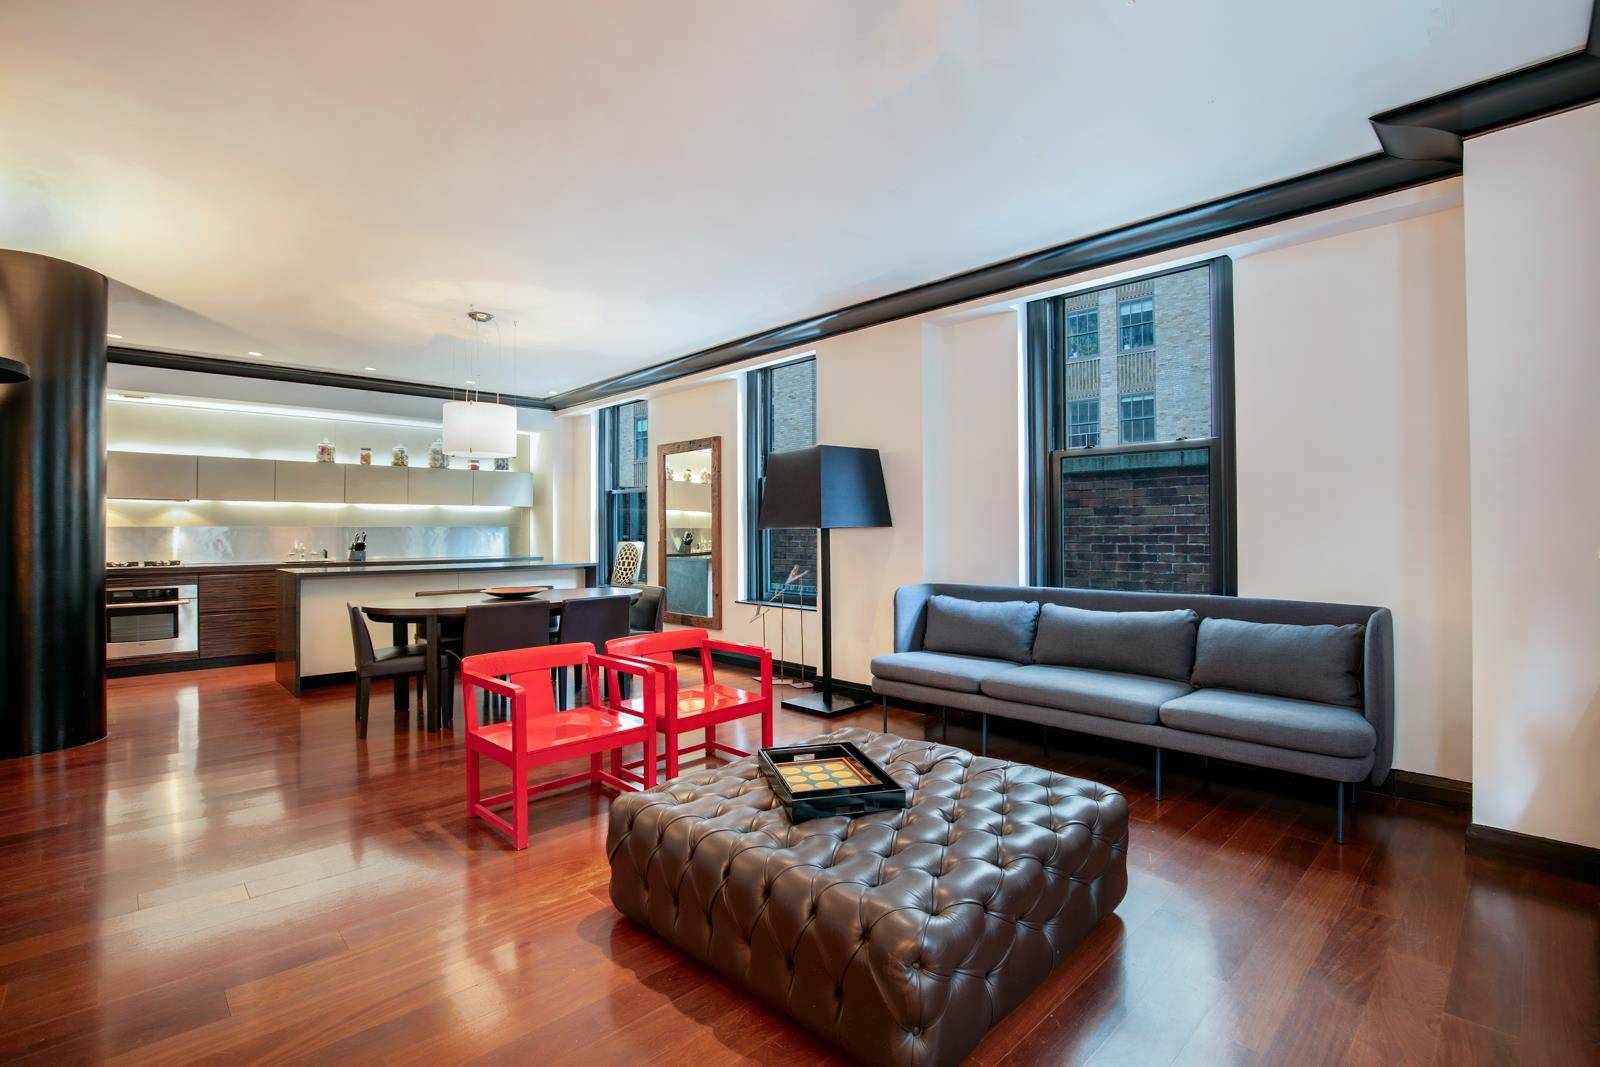 Live lavishly in this corner 1 bedroom penthouse located at the Cipriani Club Residences at 55 Wall Street.